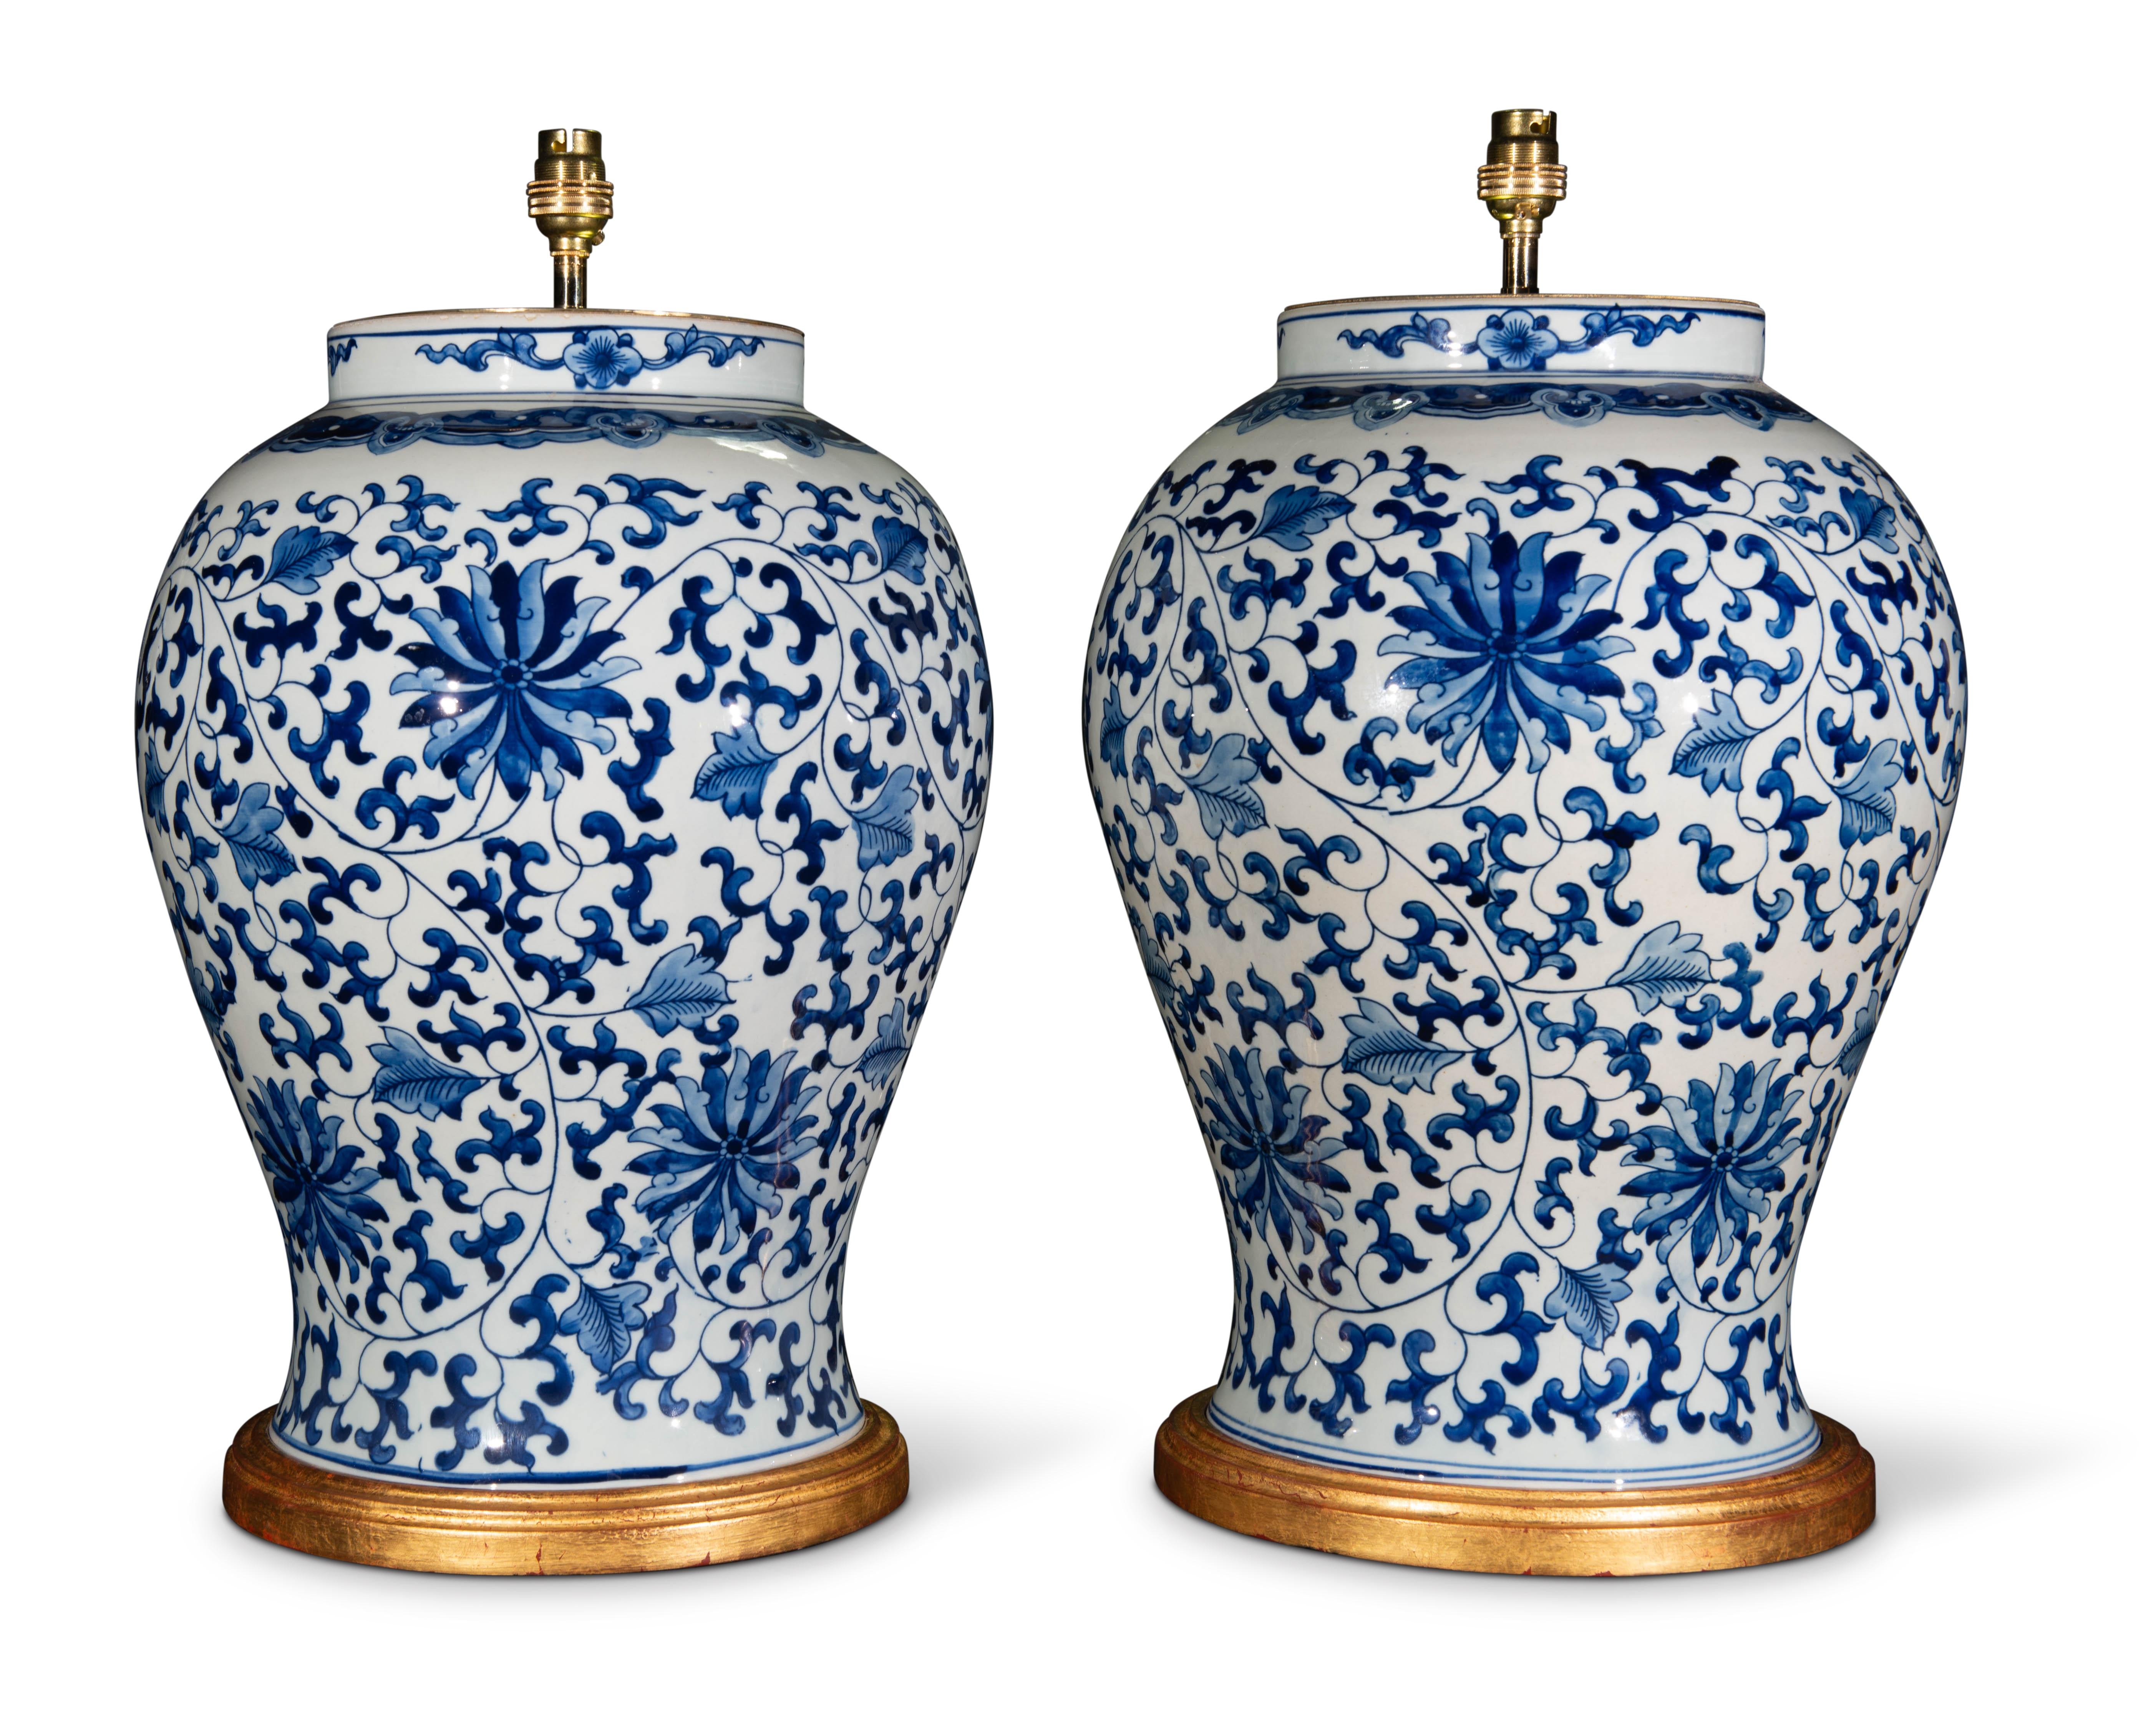 A very fine pair of large Chinese blue and white baluster vases, decorated throughout in the Kangxi style with lotus flowers and trailing foliage in tones of blue on a white ground. Now mounted as lamps with hand gilded turned bases.

Height of